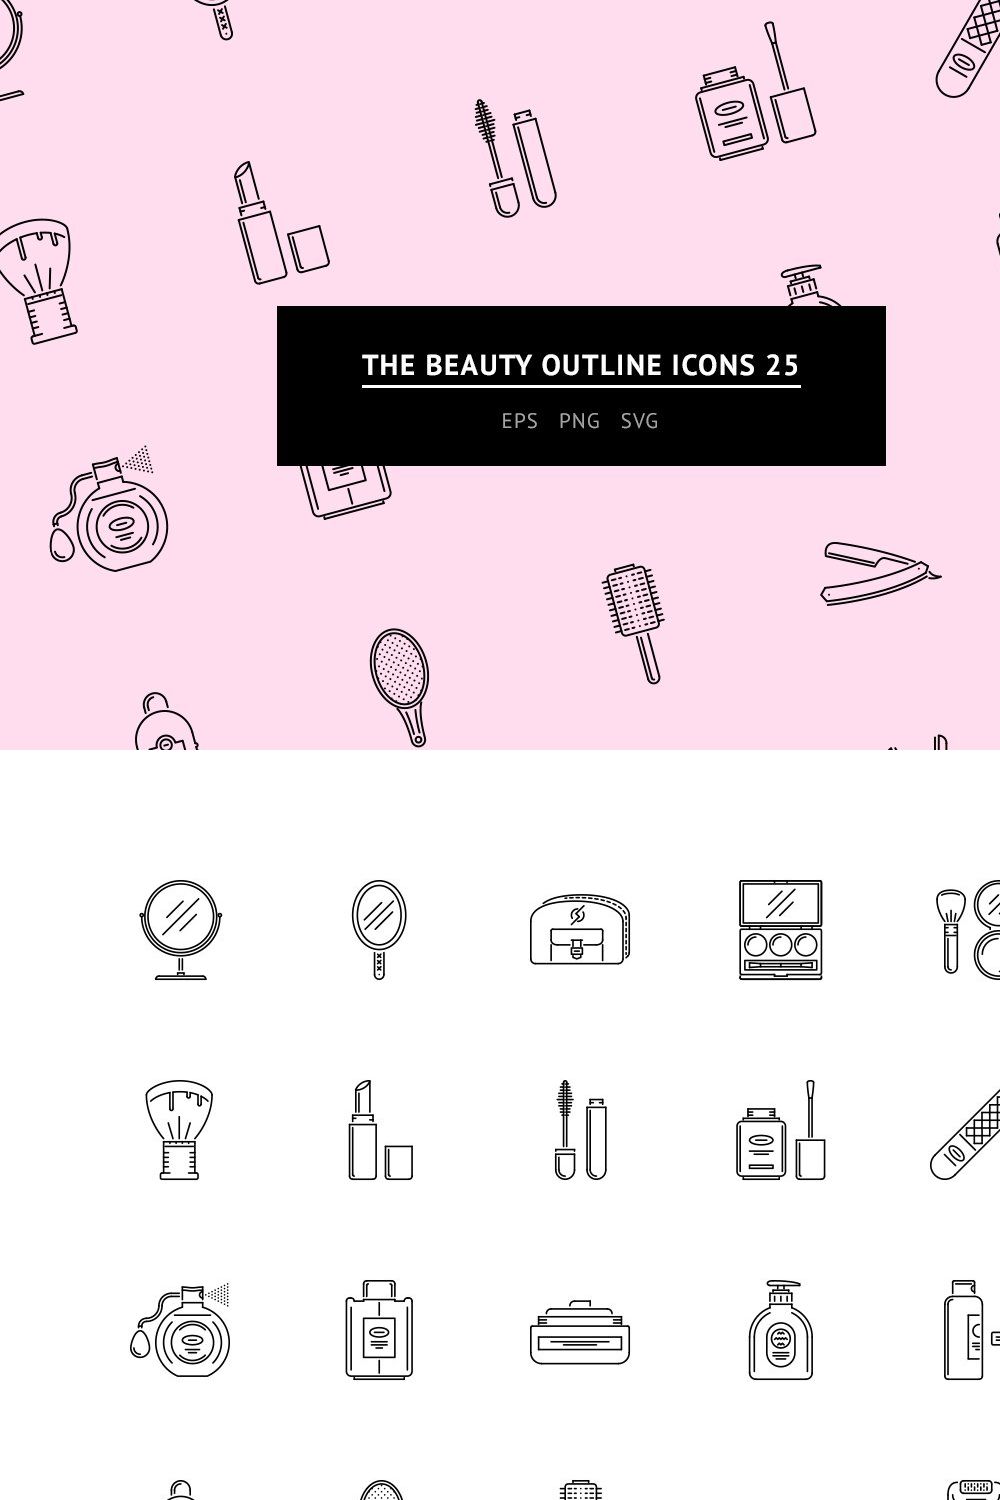 The Beauty Outline Icons 25 pinterest preview image.